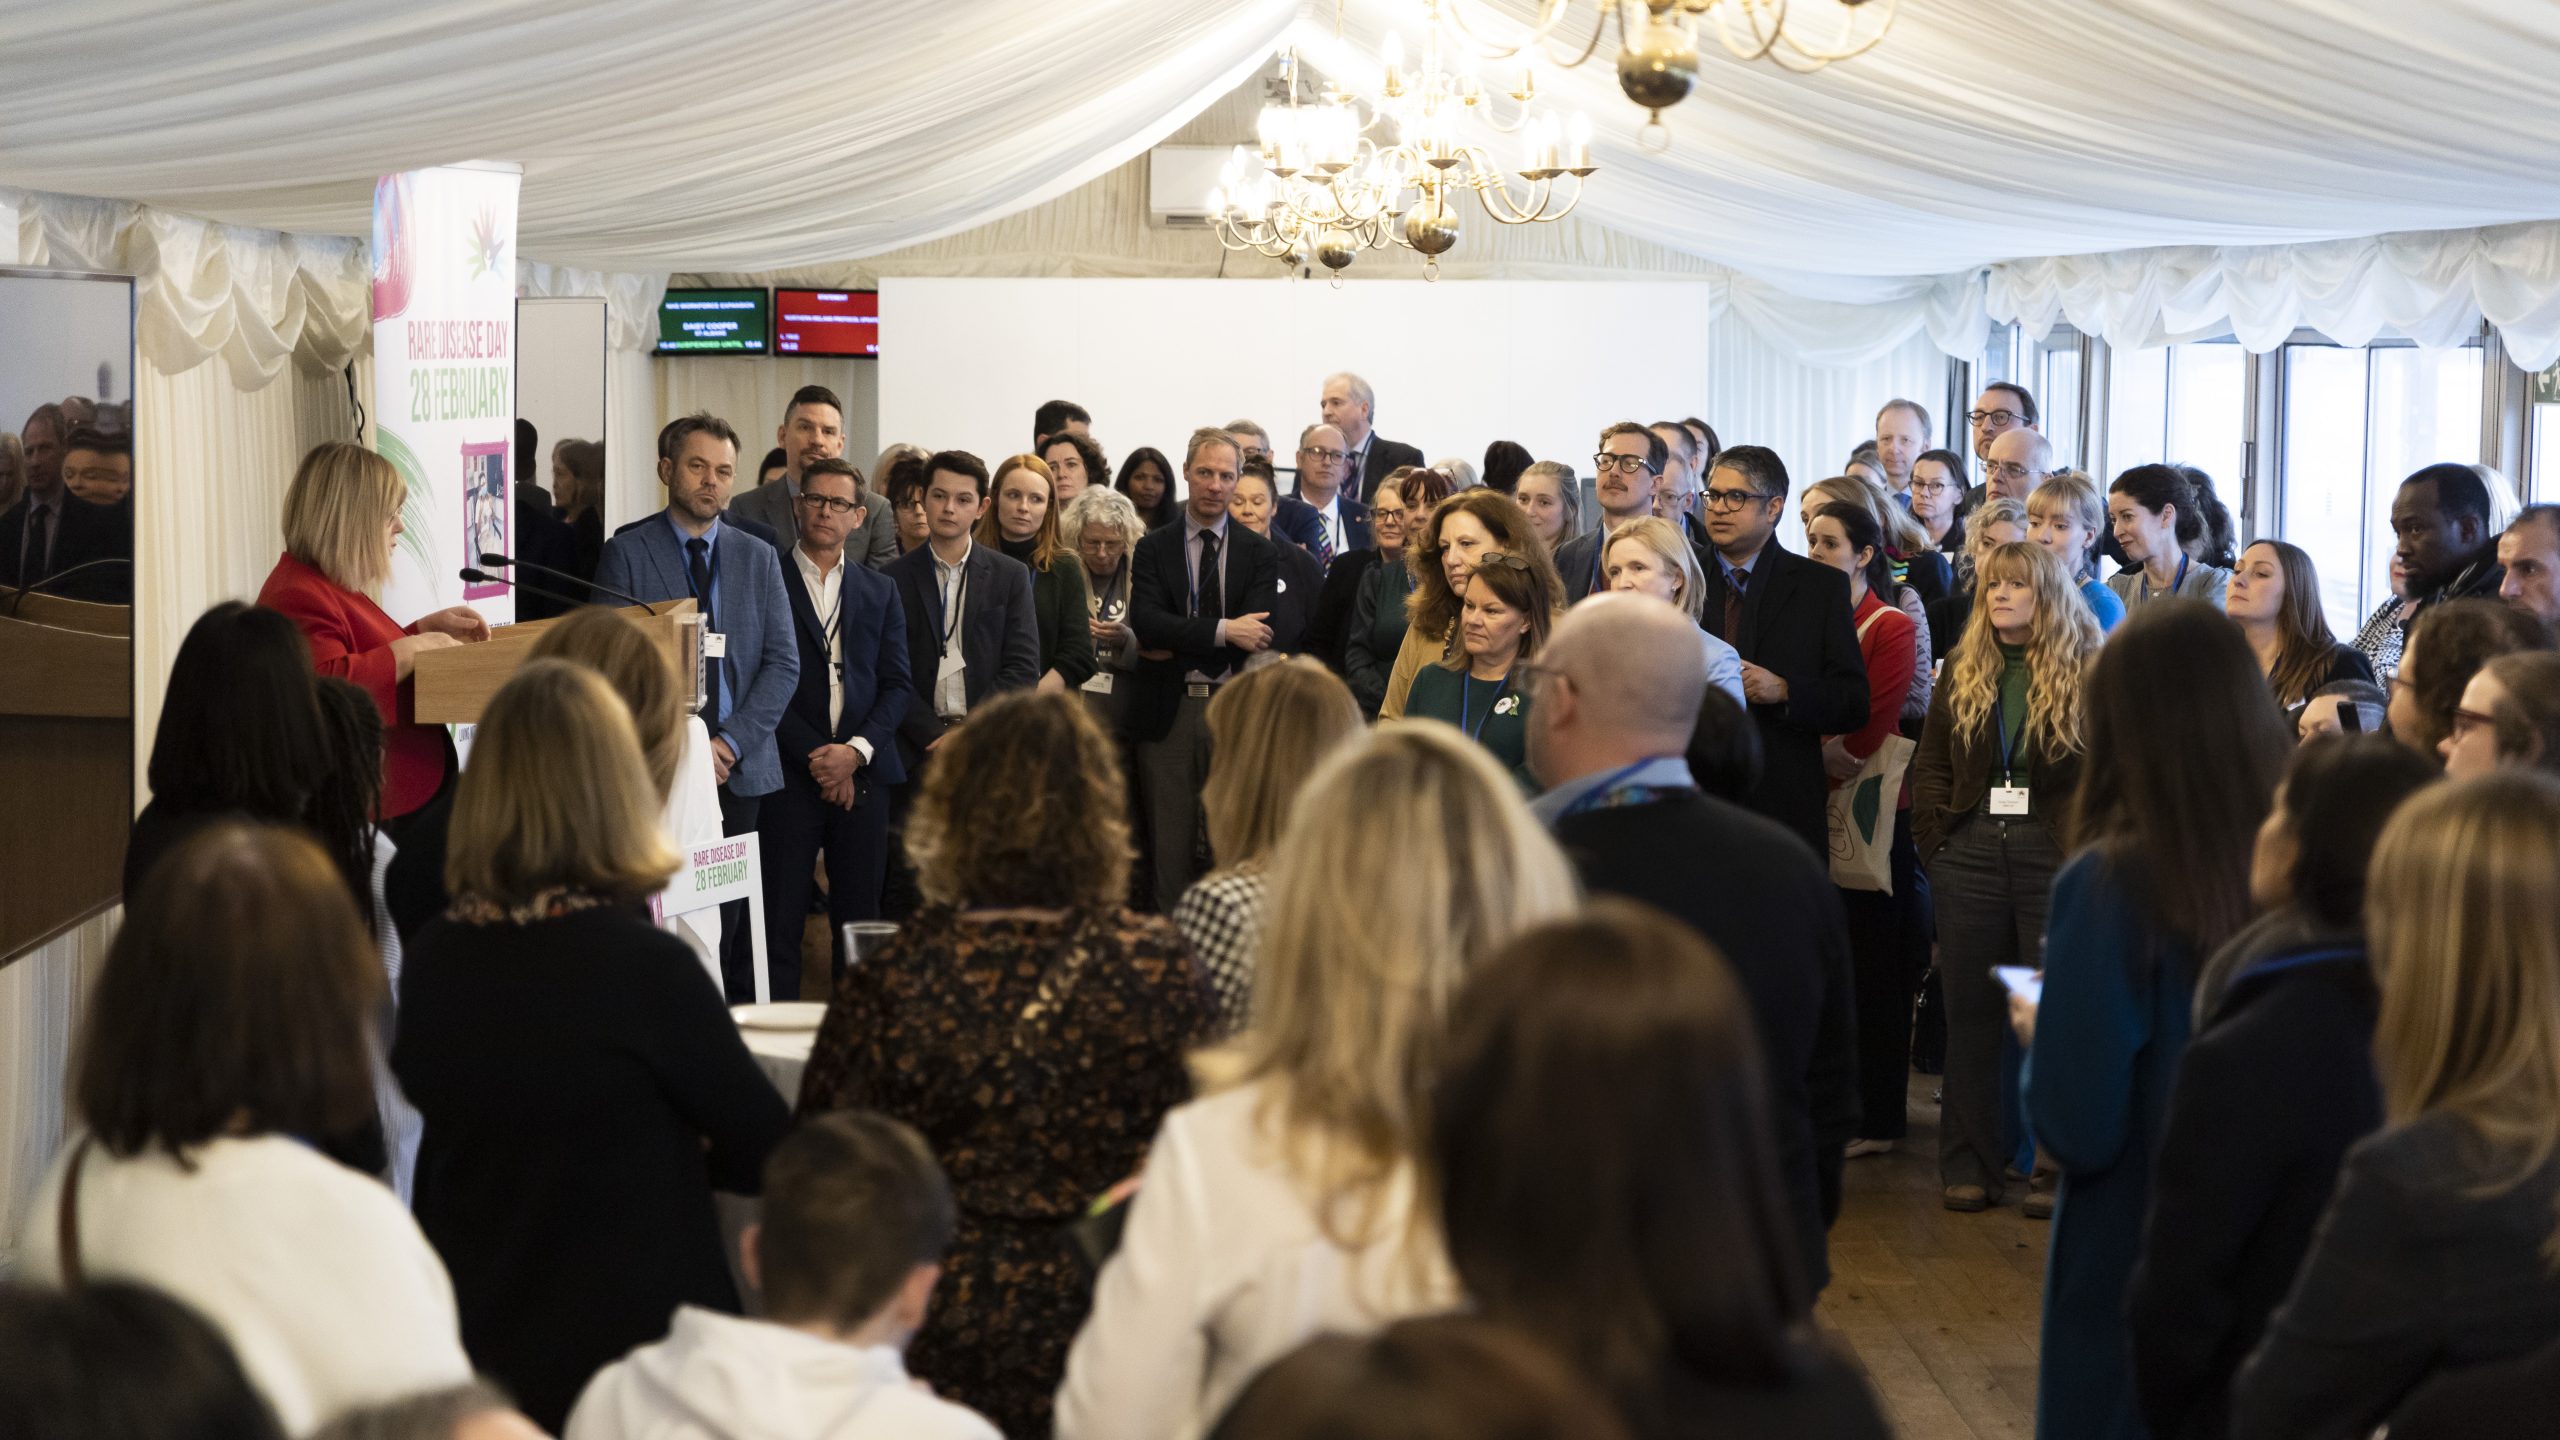 A collection of people around at the Genetic Alliance UK Rare Disease Day event in Westminster parliament. Everyone stands listening to a speaker, stood on a podium, to the left of the image